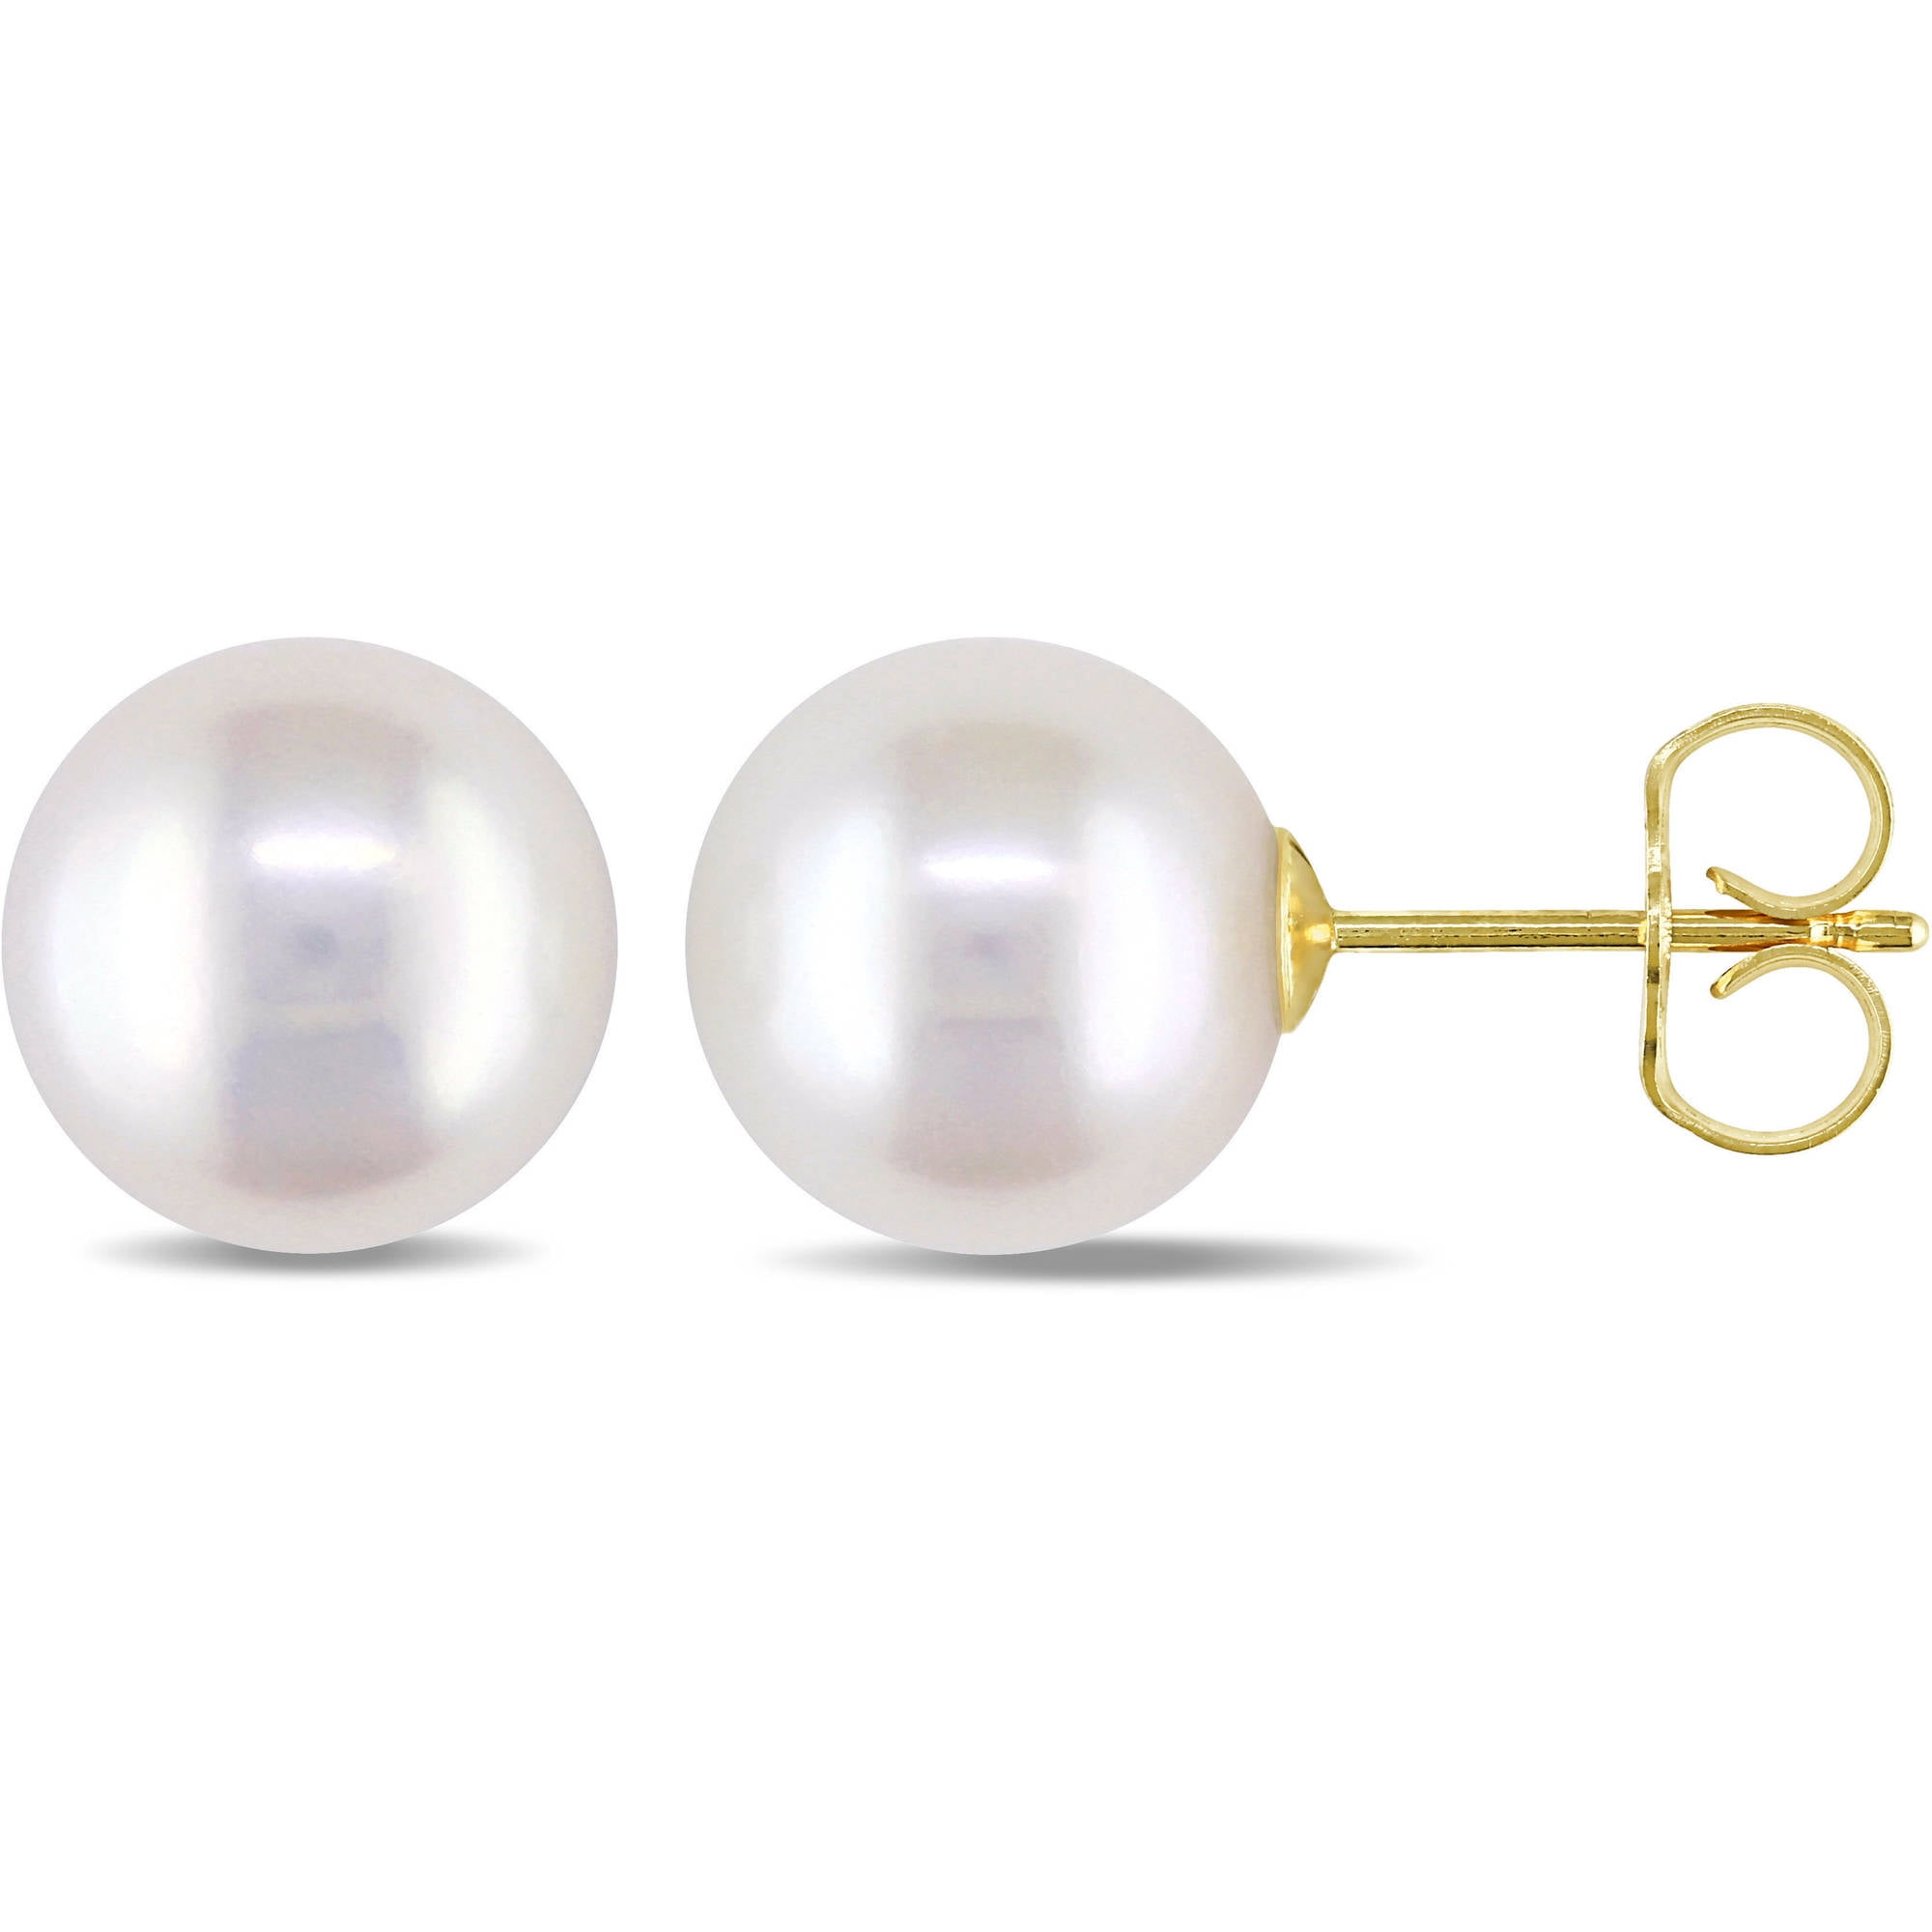 7-7.5mm White Round Cultured Pearl 14kt Yellow Gold Stud Earrings 